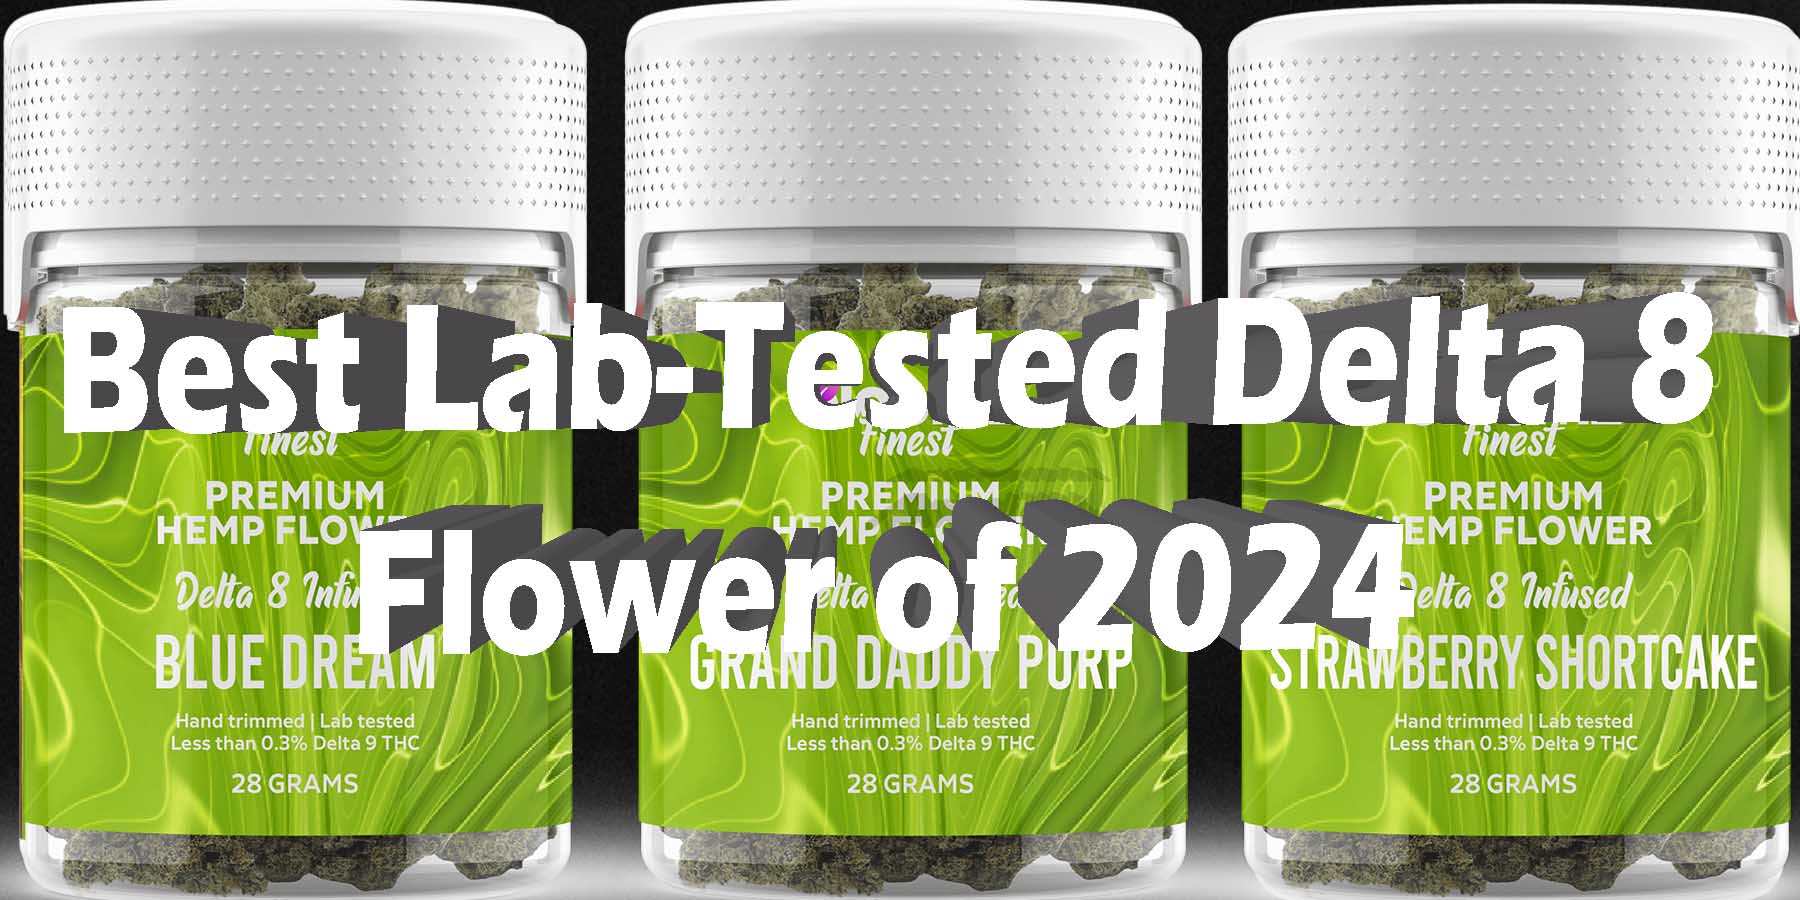 Best Lab Tested Delta 8 Flower of 2024 Best Lab WhereToGet HowToGetNearMe BestPlace LowestPrice Coupon Discount For Smoking Best High Smoke Shop Online Near Me Strongest Binoid